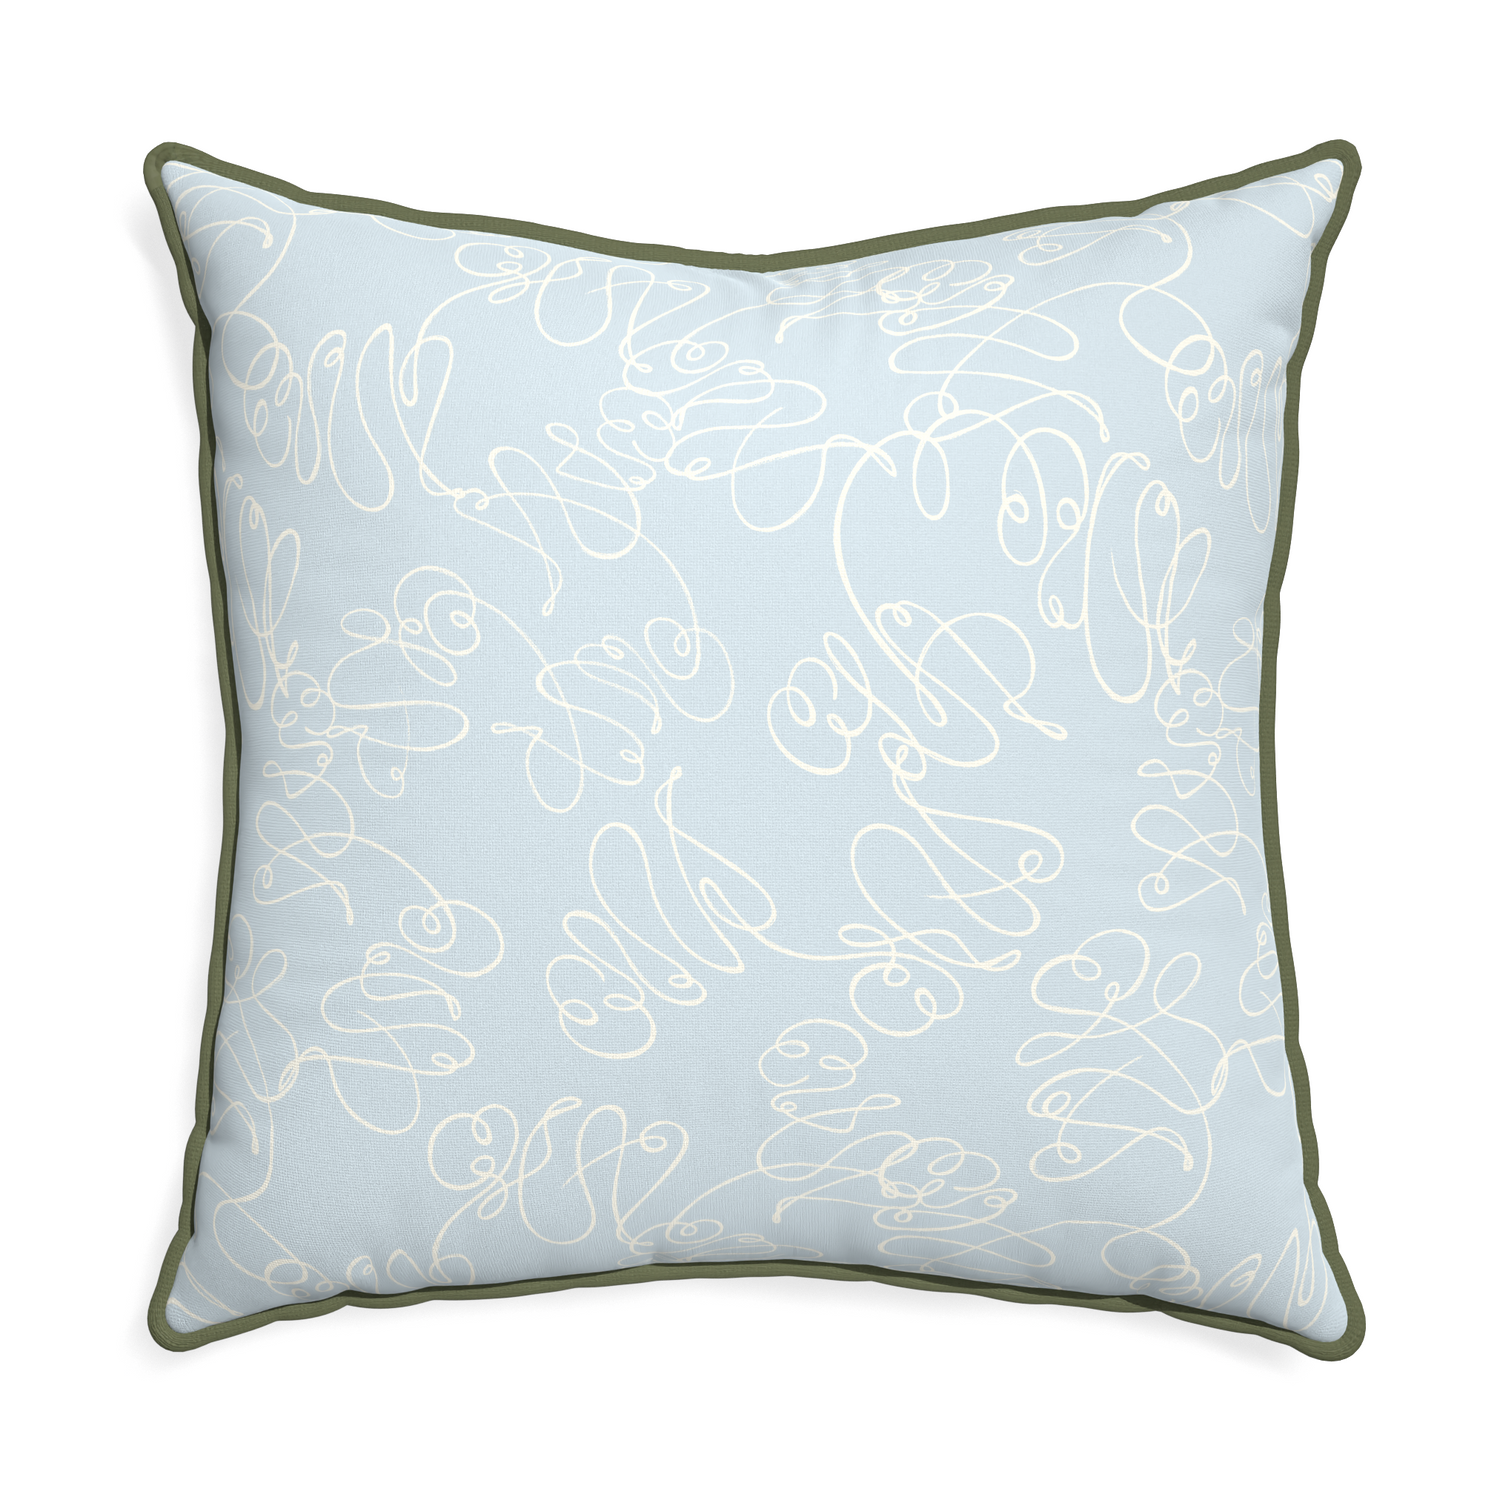 Euro-sham mirabella custom pillow with f piping on white background